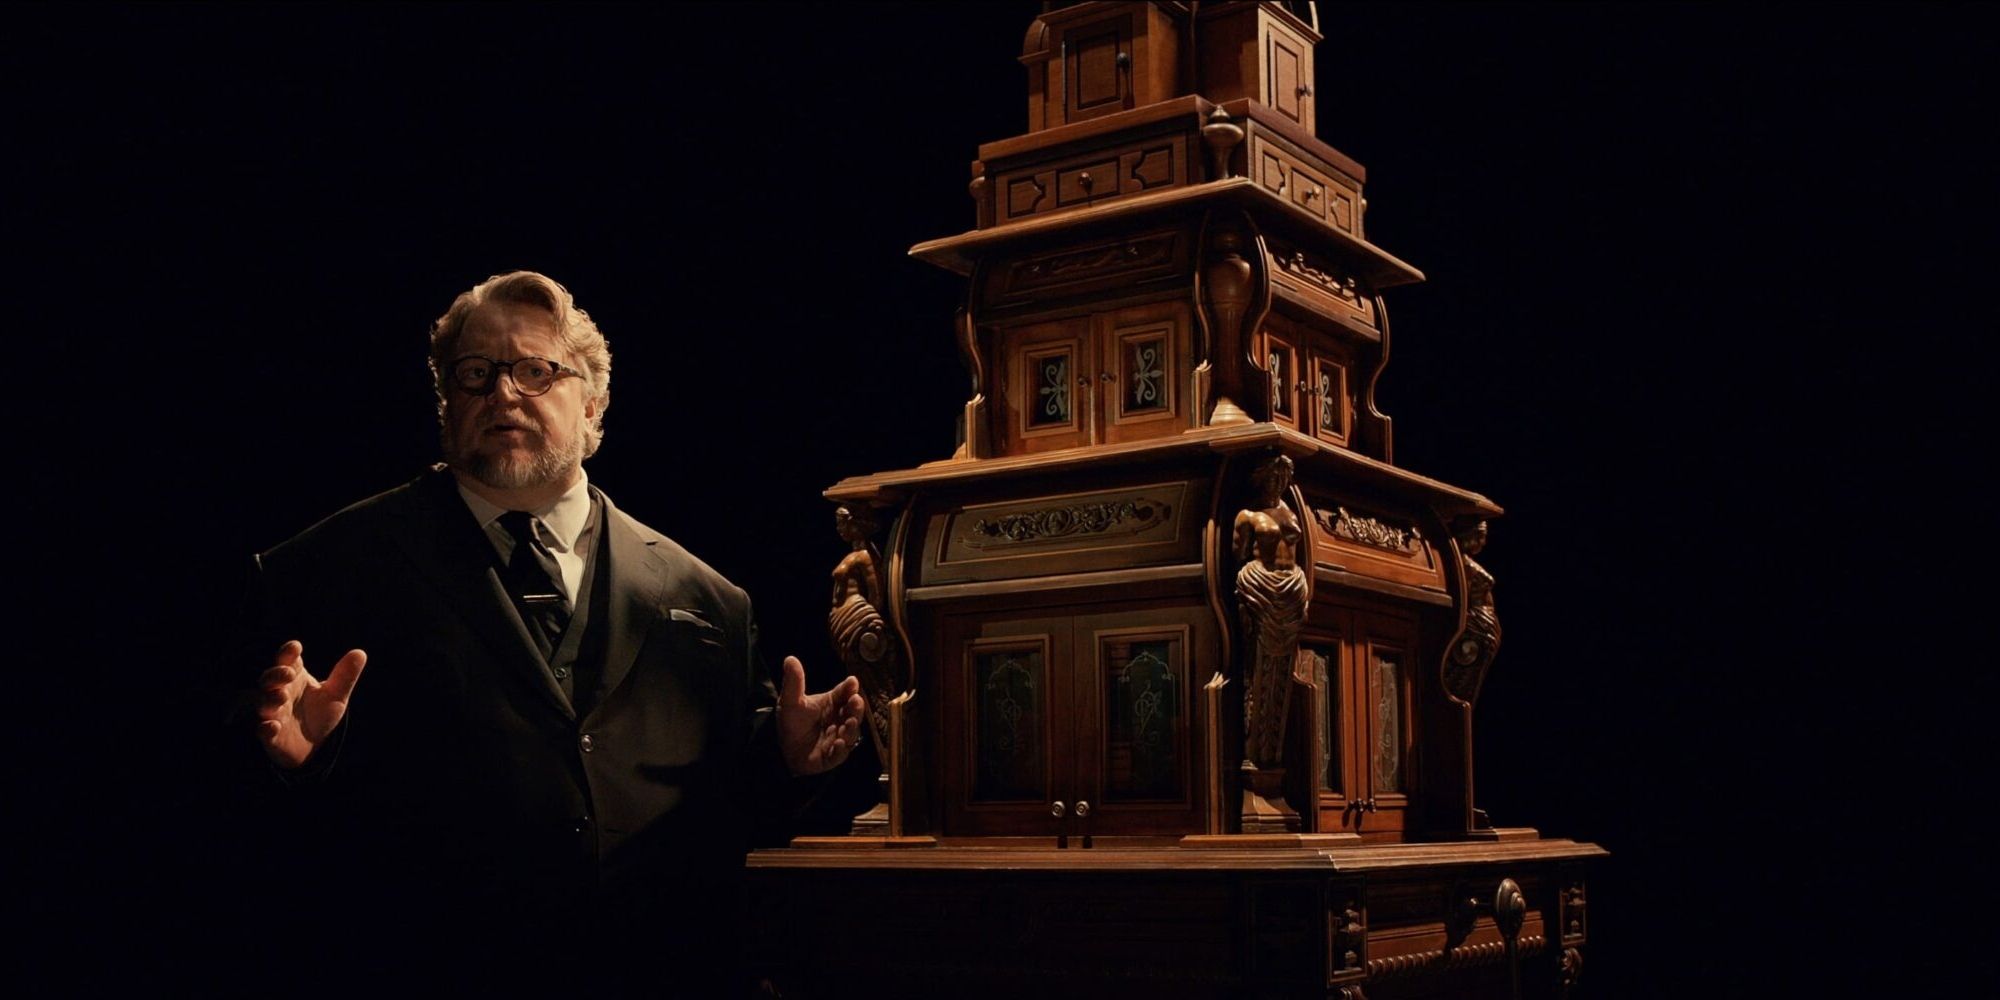 Guillermo del Toro with his Cabinet of Curiosities